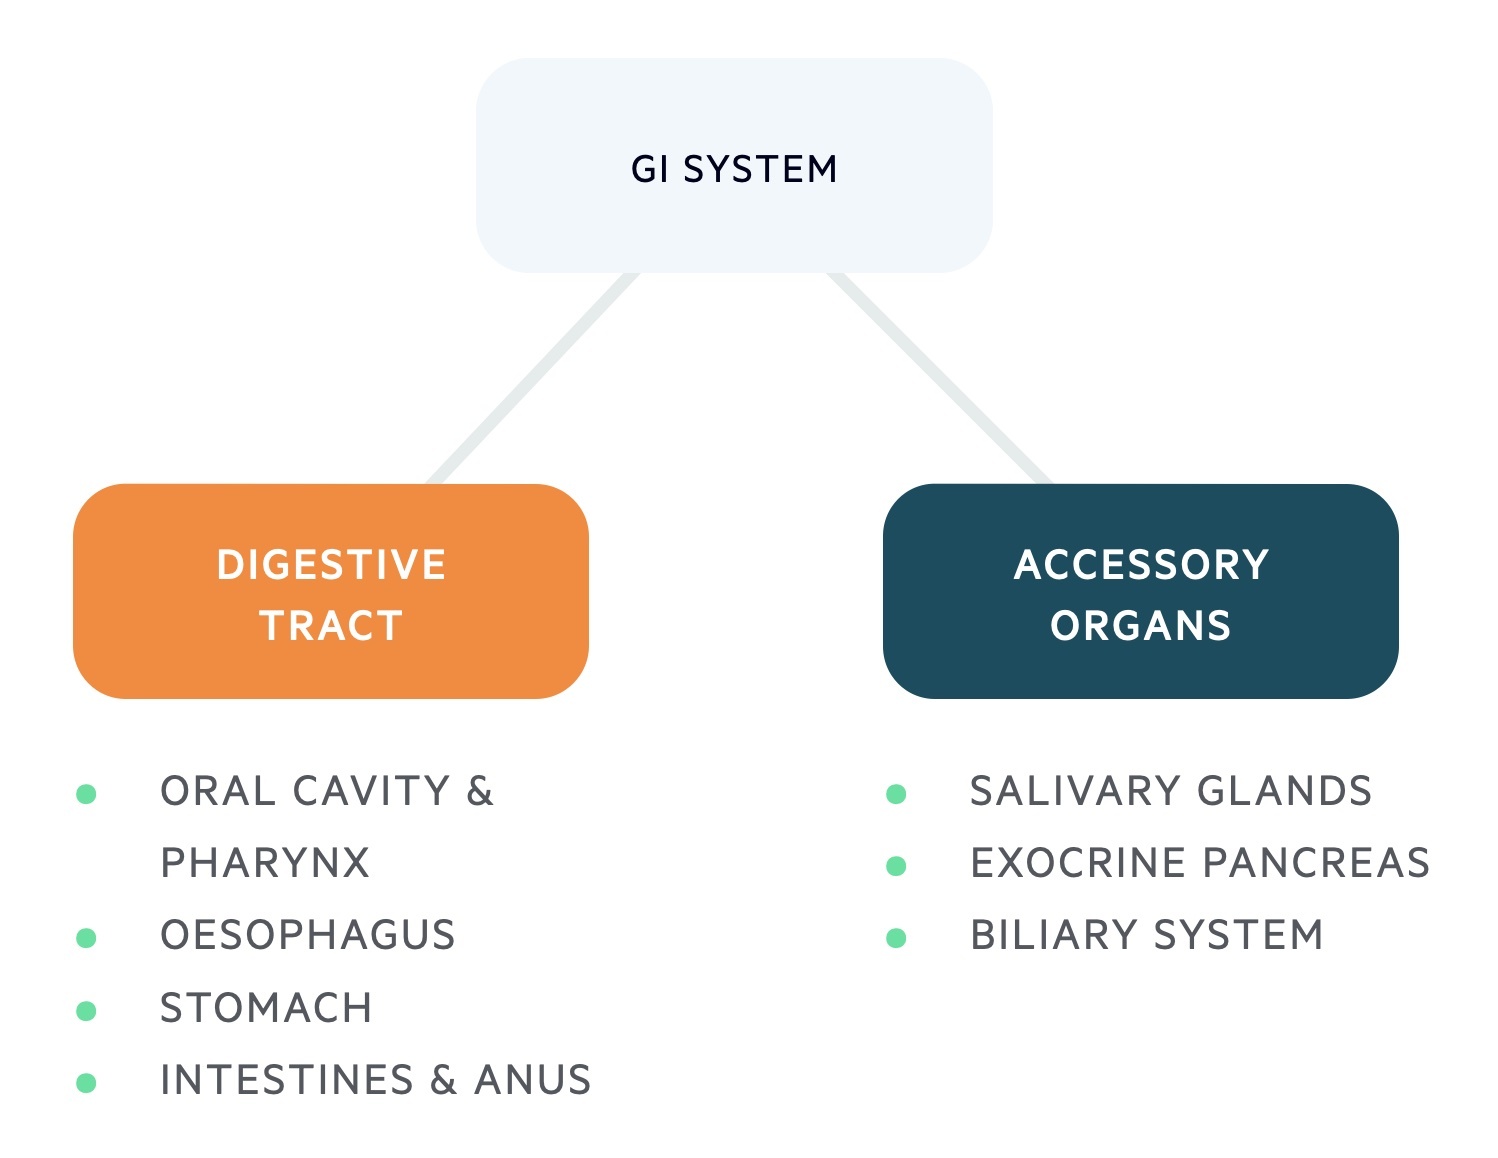 Overview of the GI system